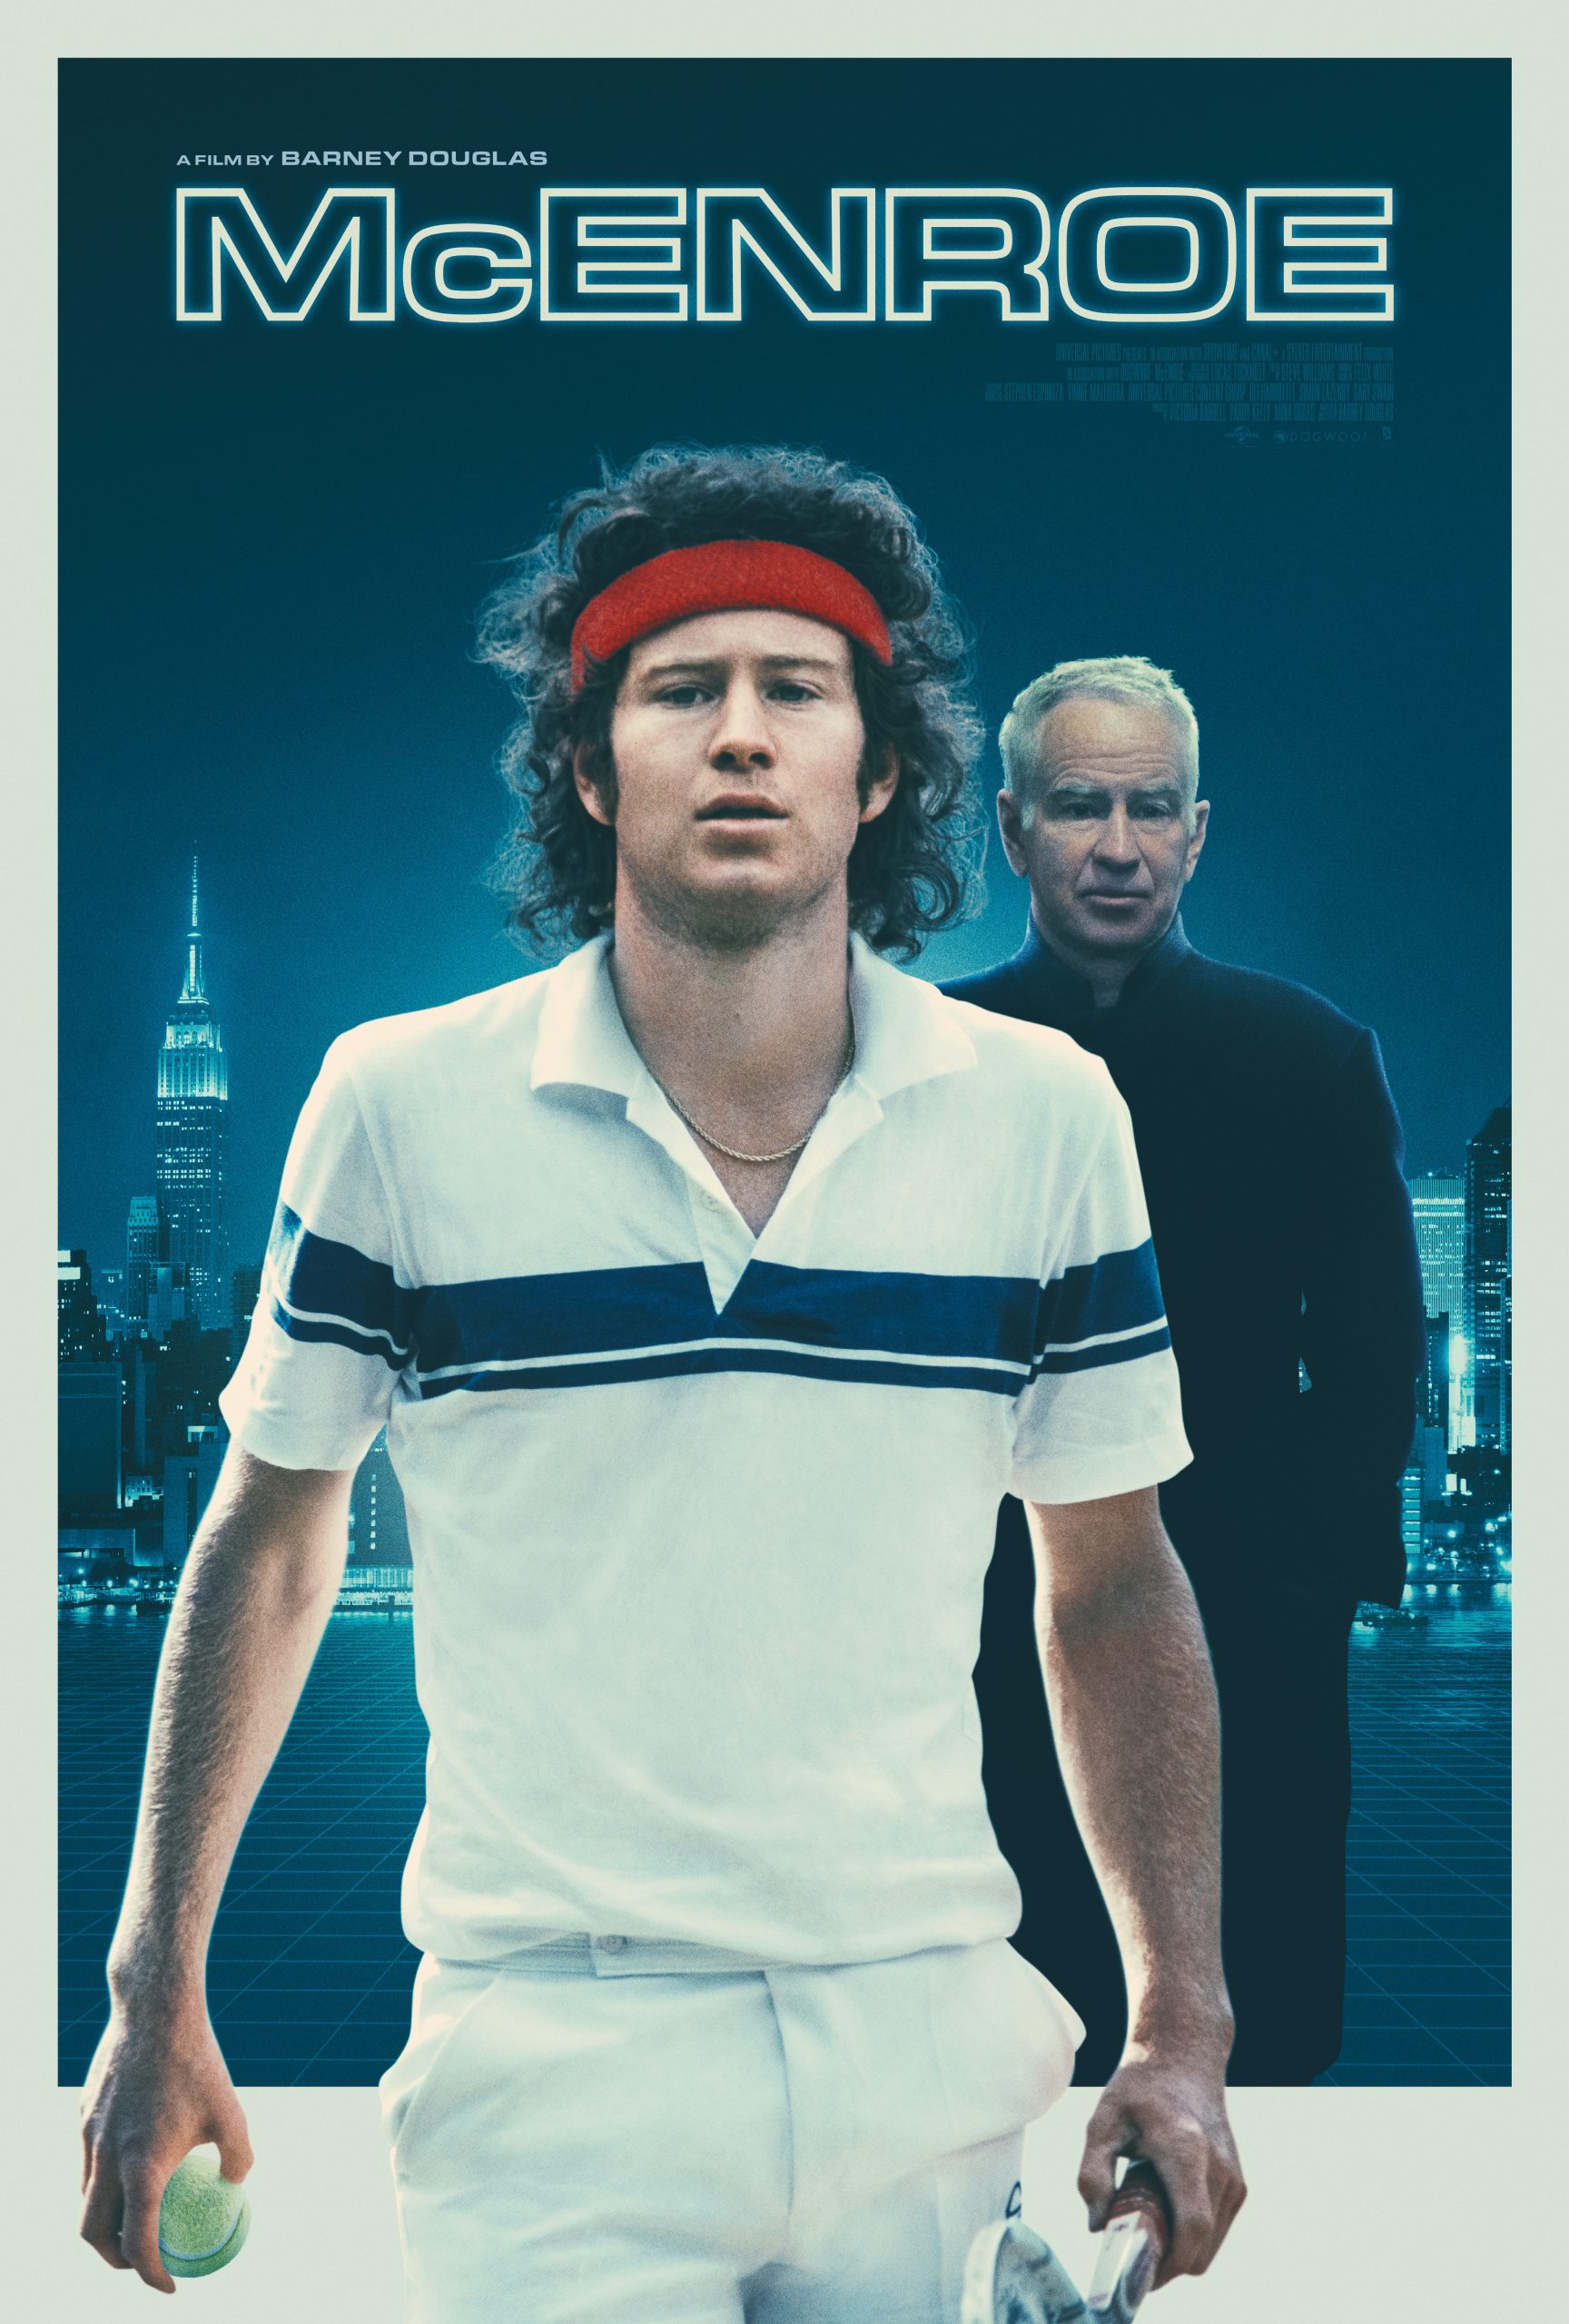 MCENROE THE MOVIE, WITH ALL THE FACTS